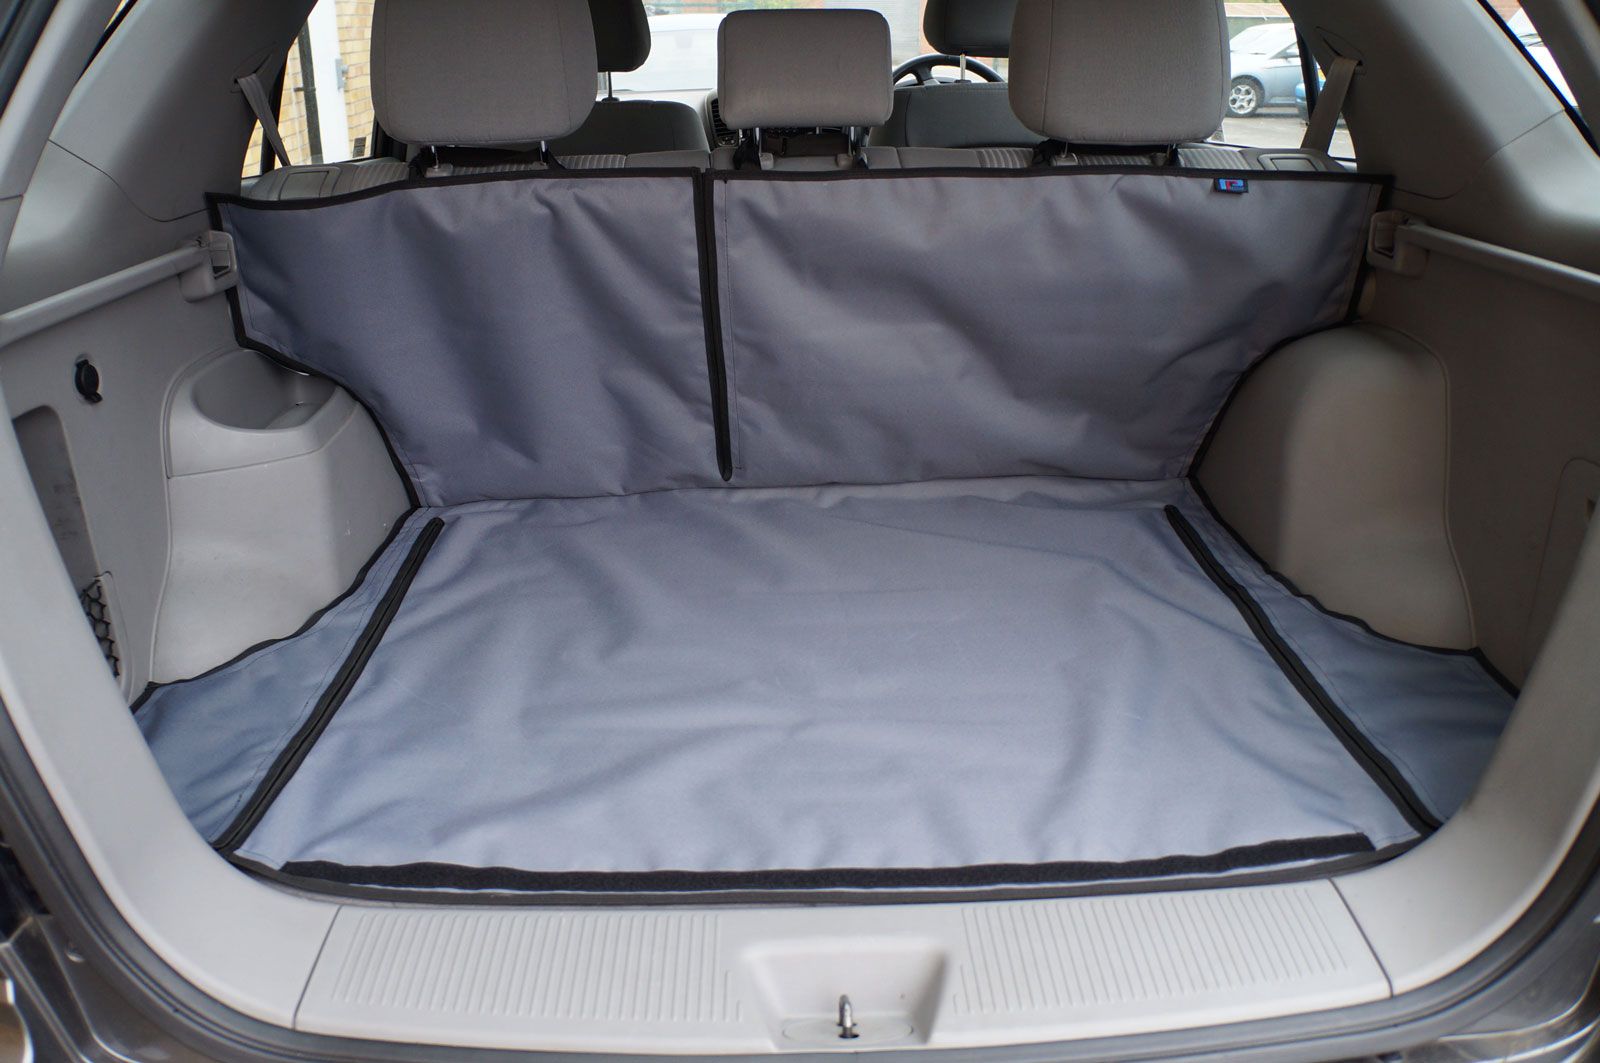 Mercedes EQC 2020 Fully Tailored Load Liner without bumper flap - Example